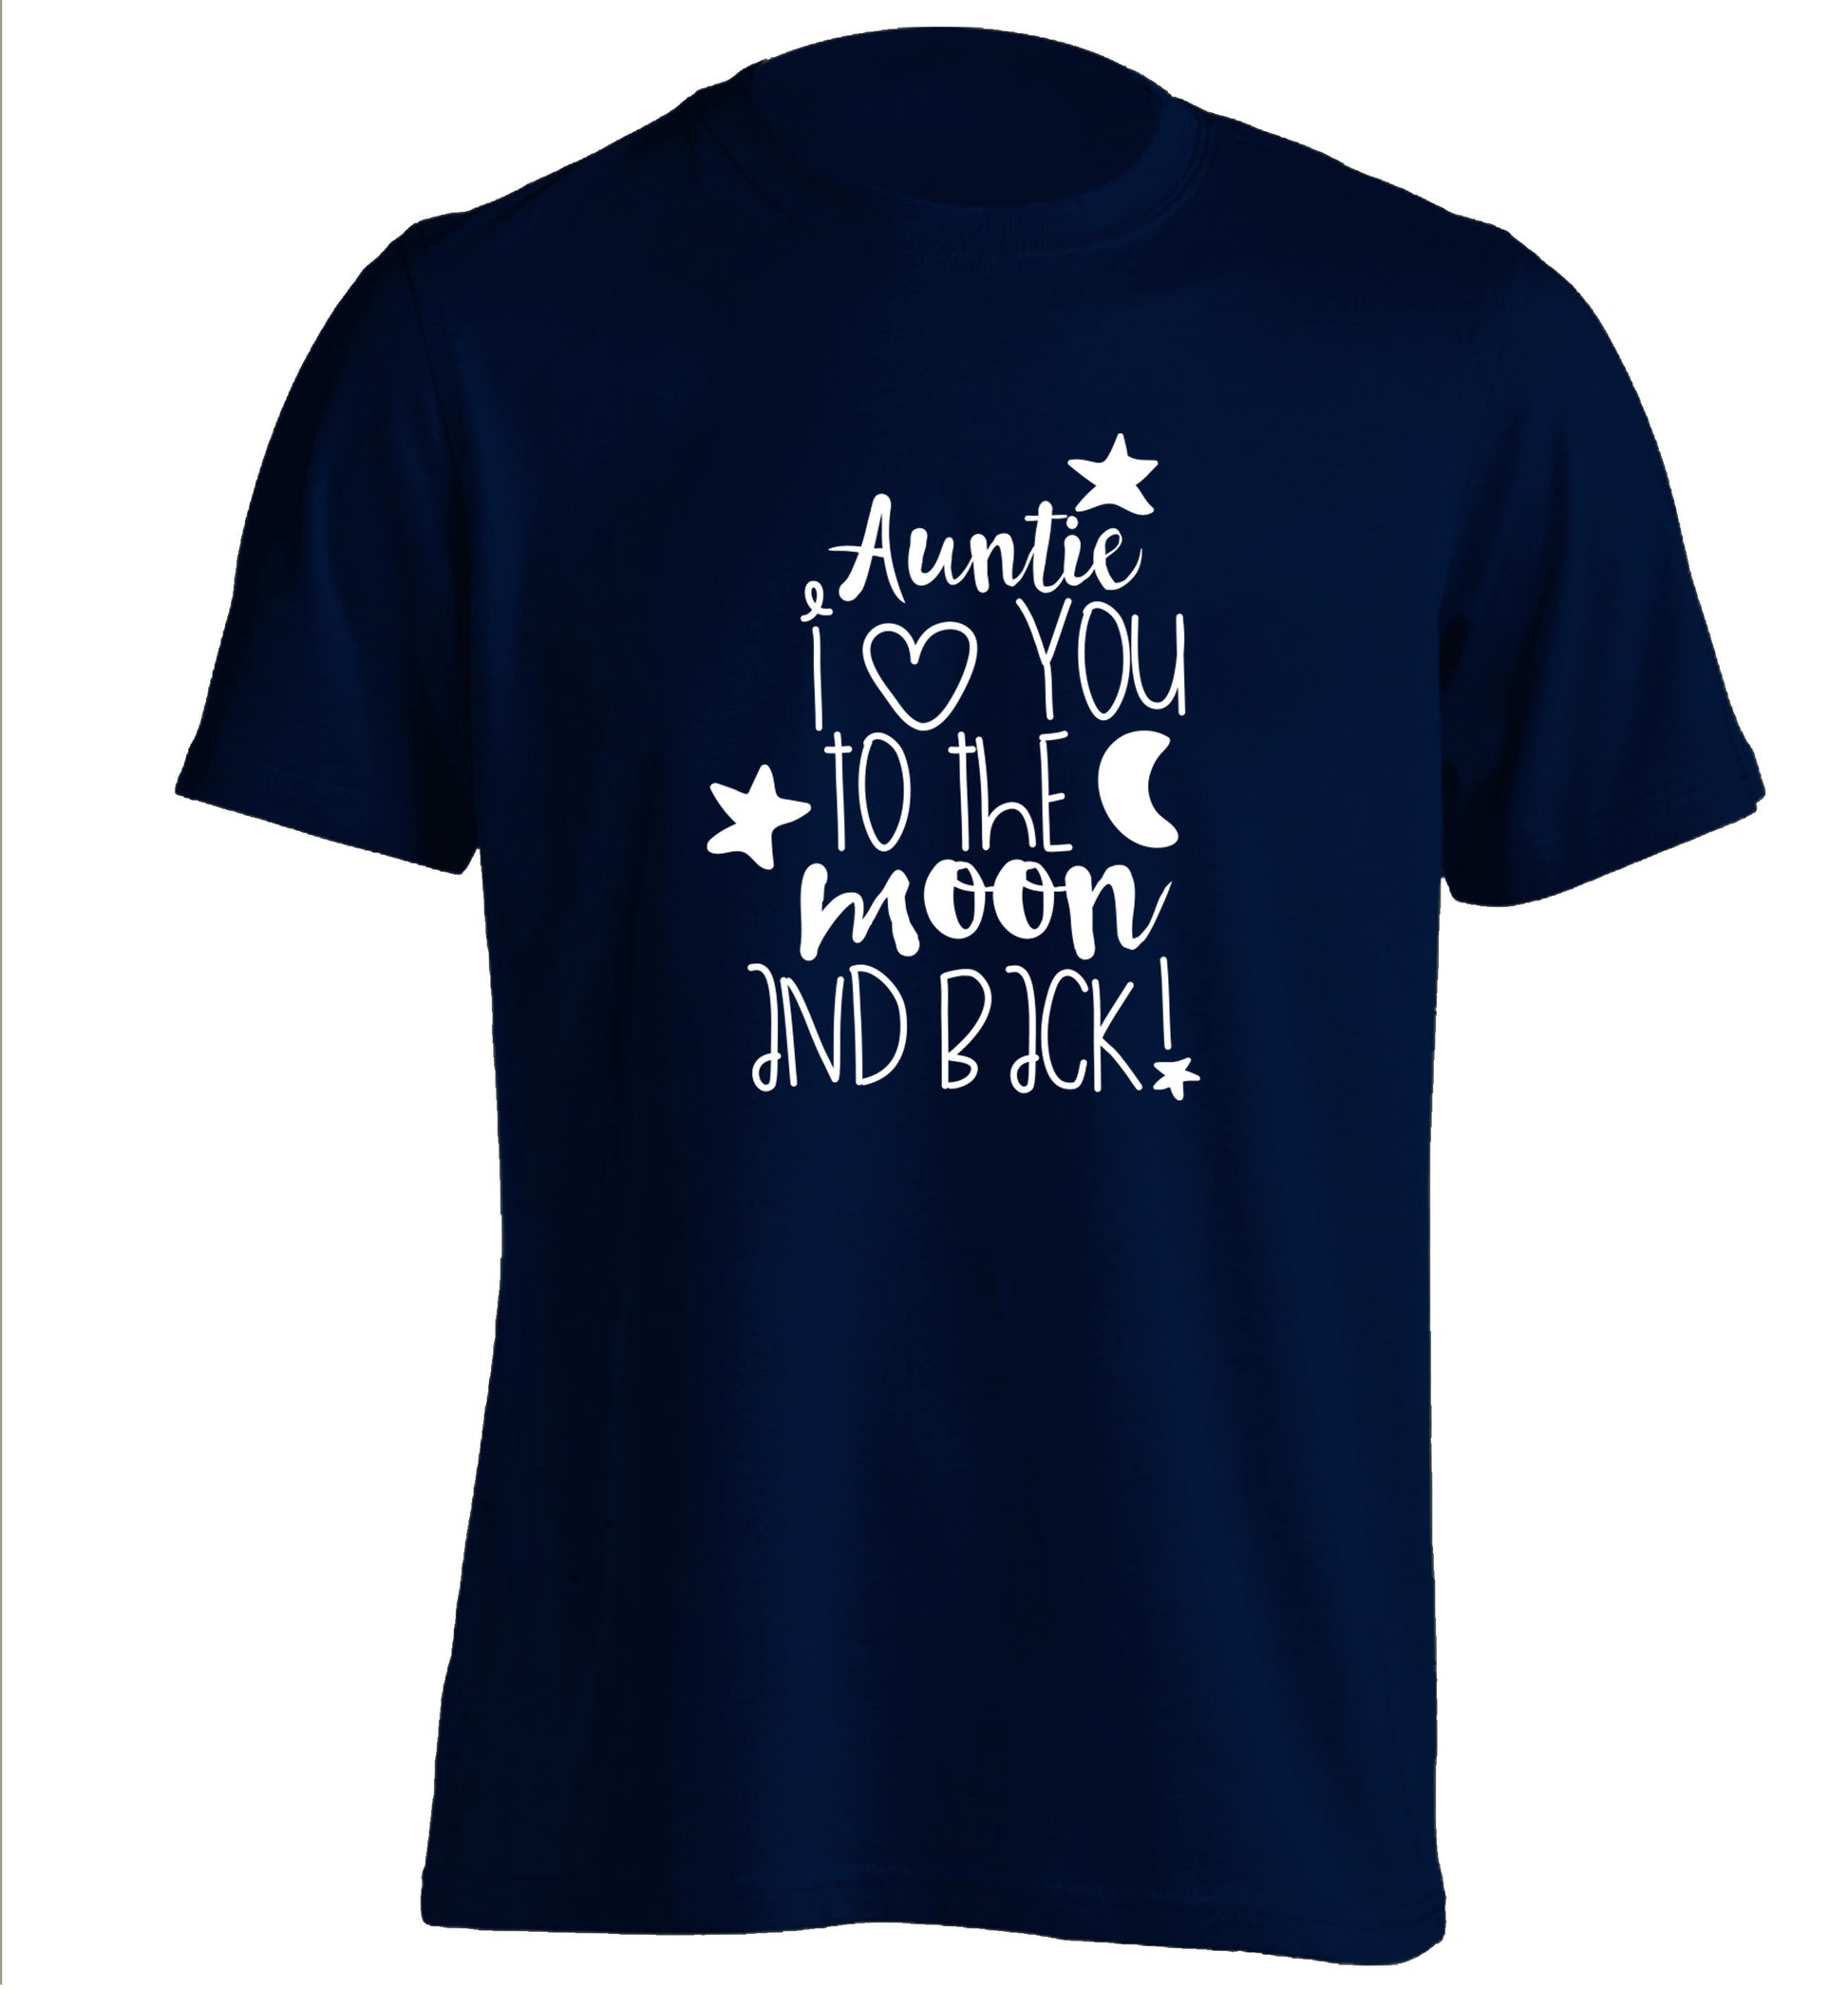 Auntie I love you to the moon and back adults unisex navy Tshirt 2XL